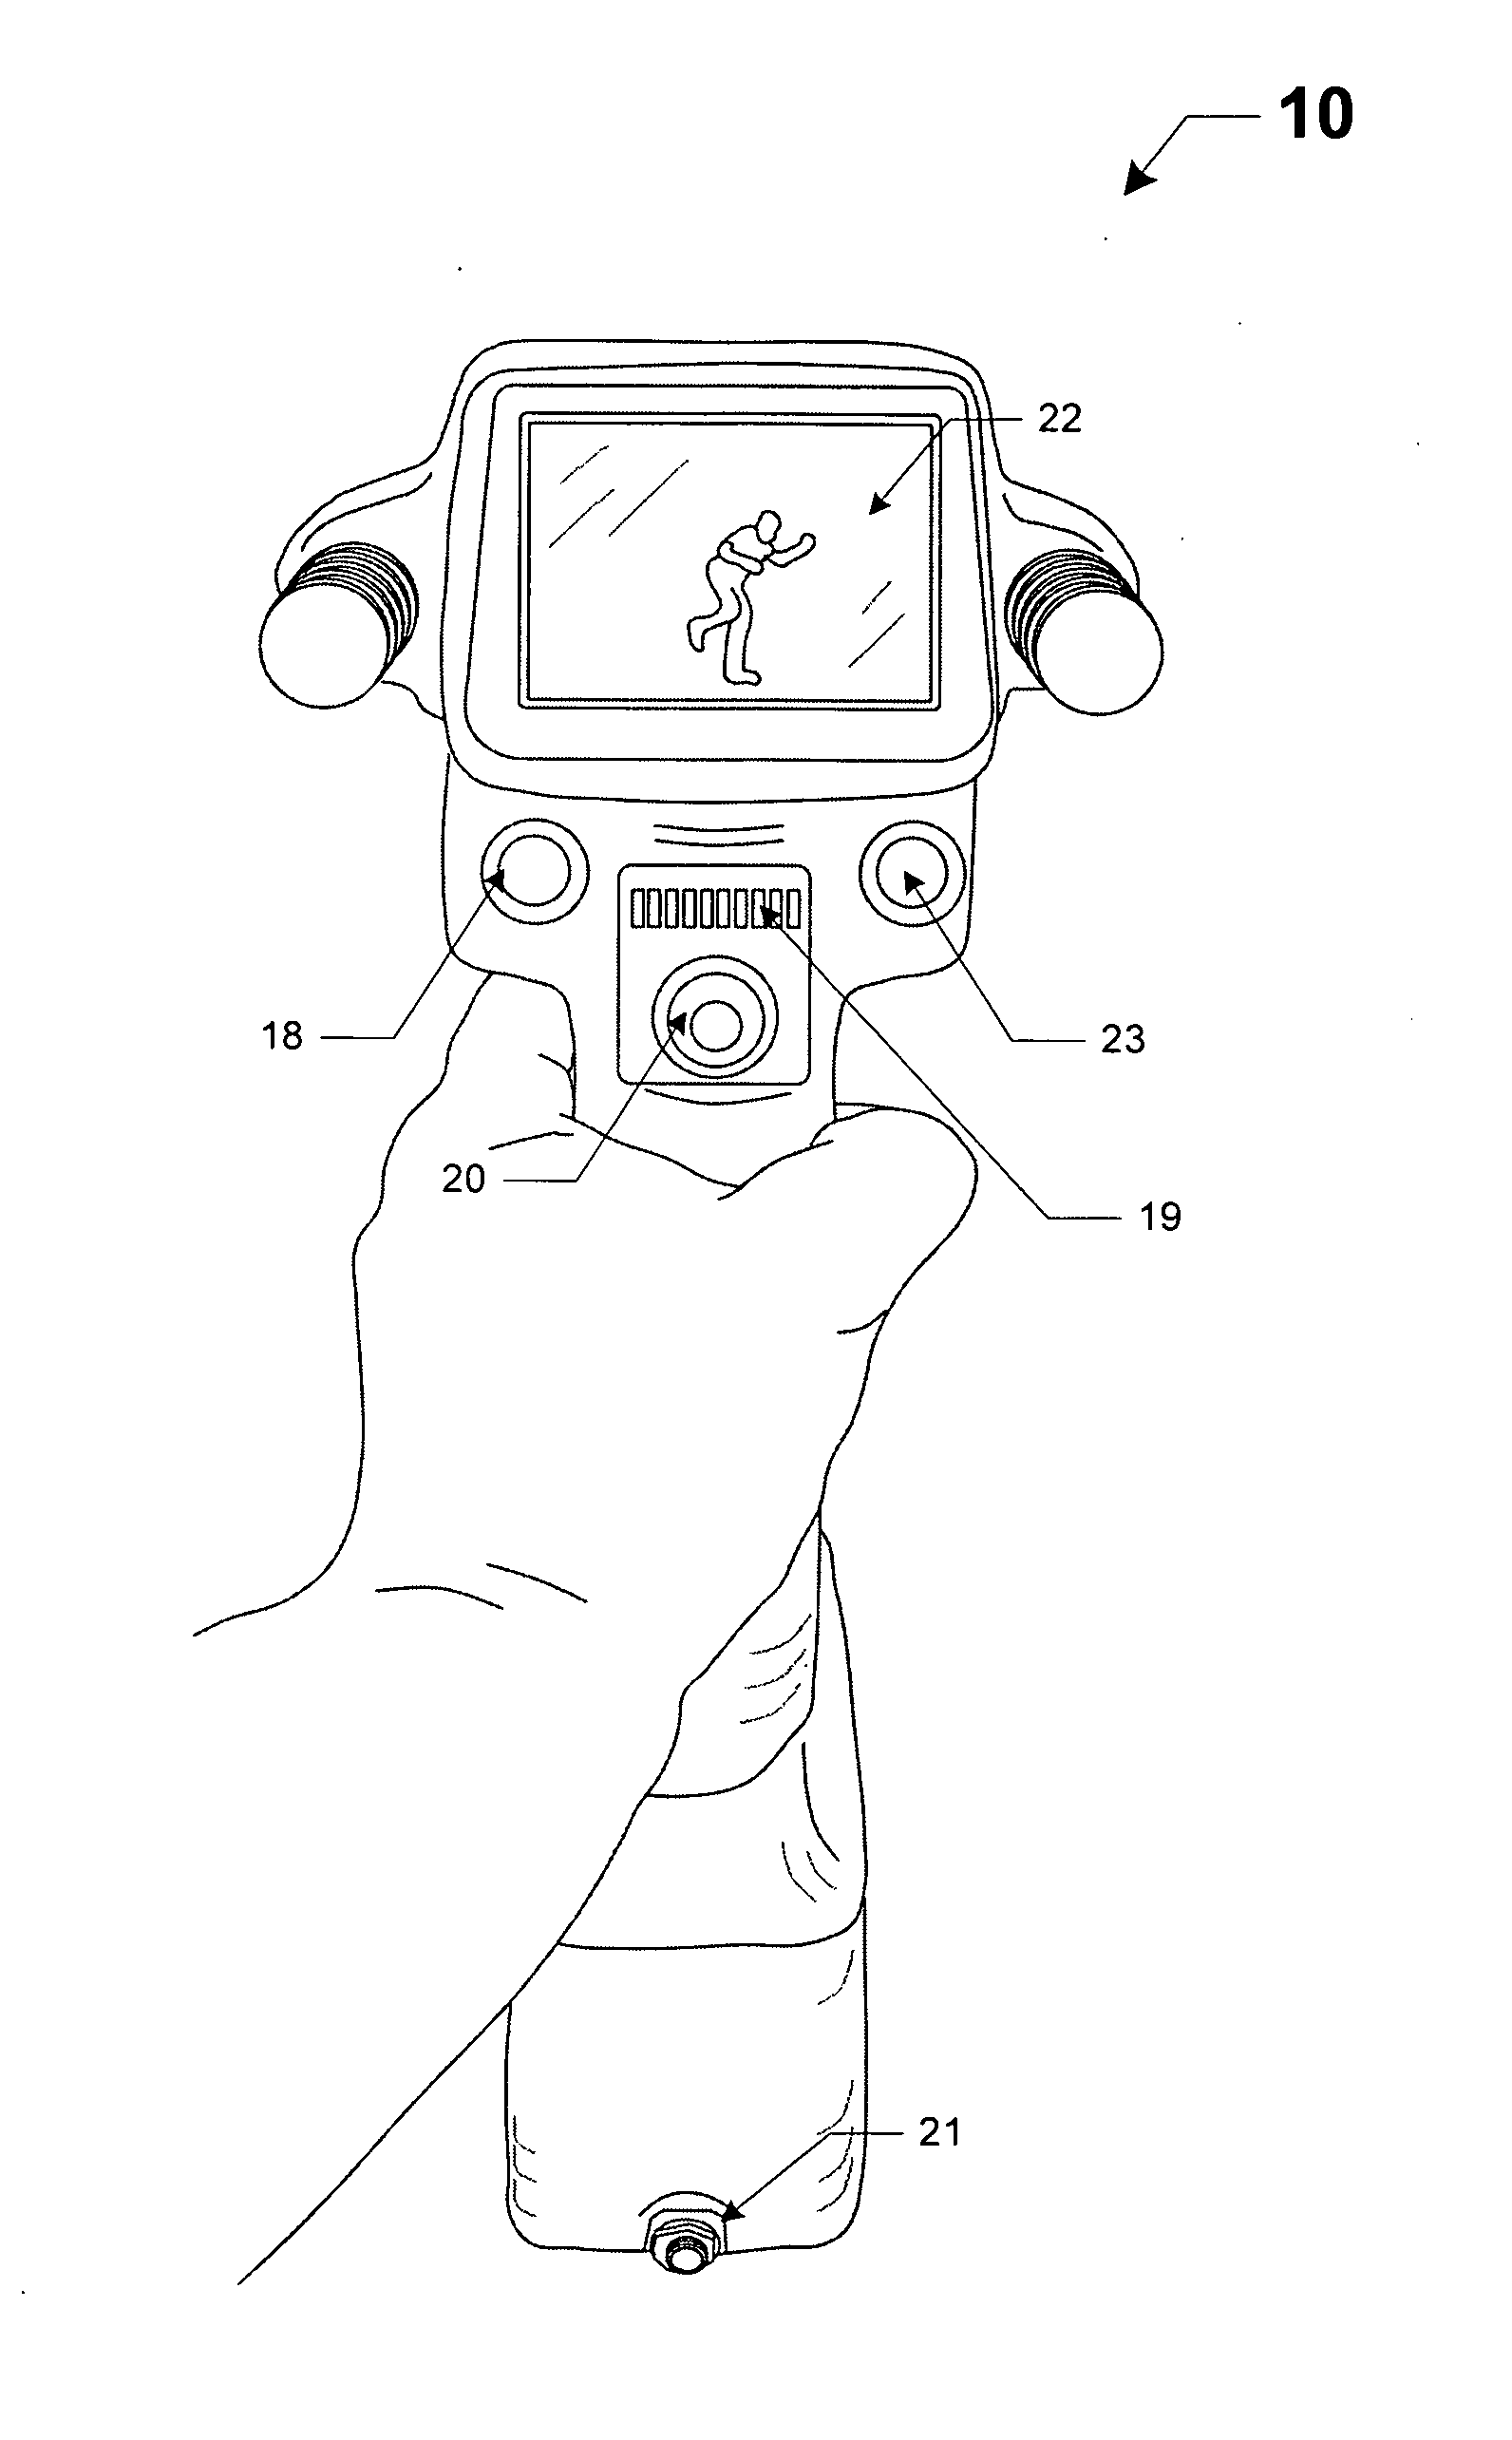 Handheld imaging and defense system